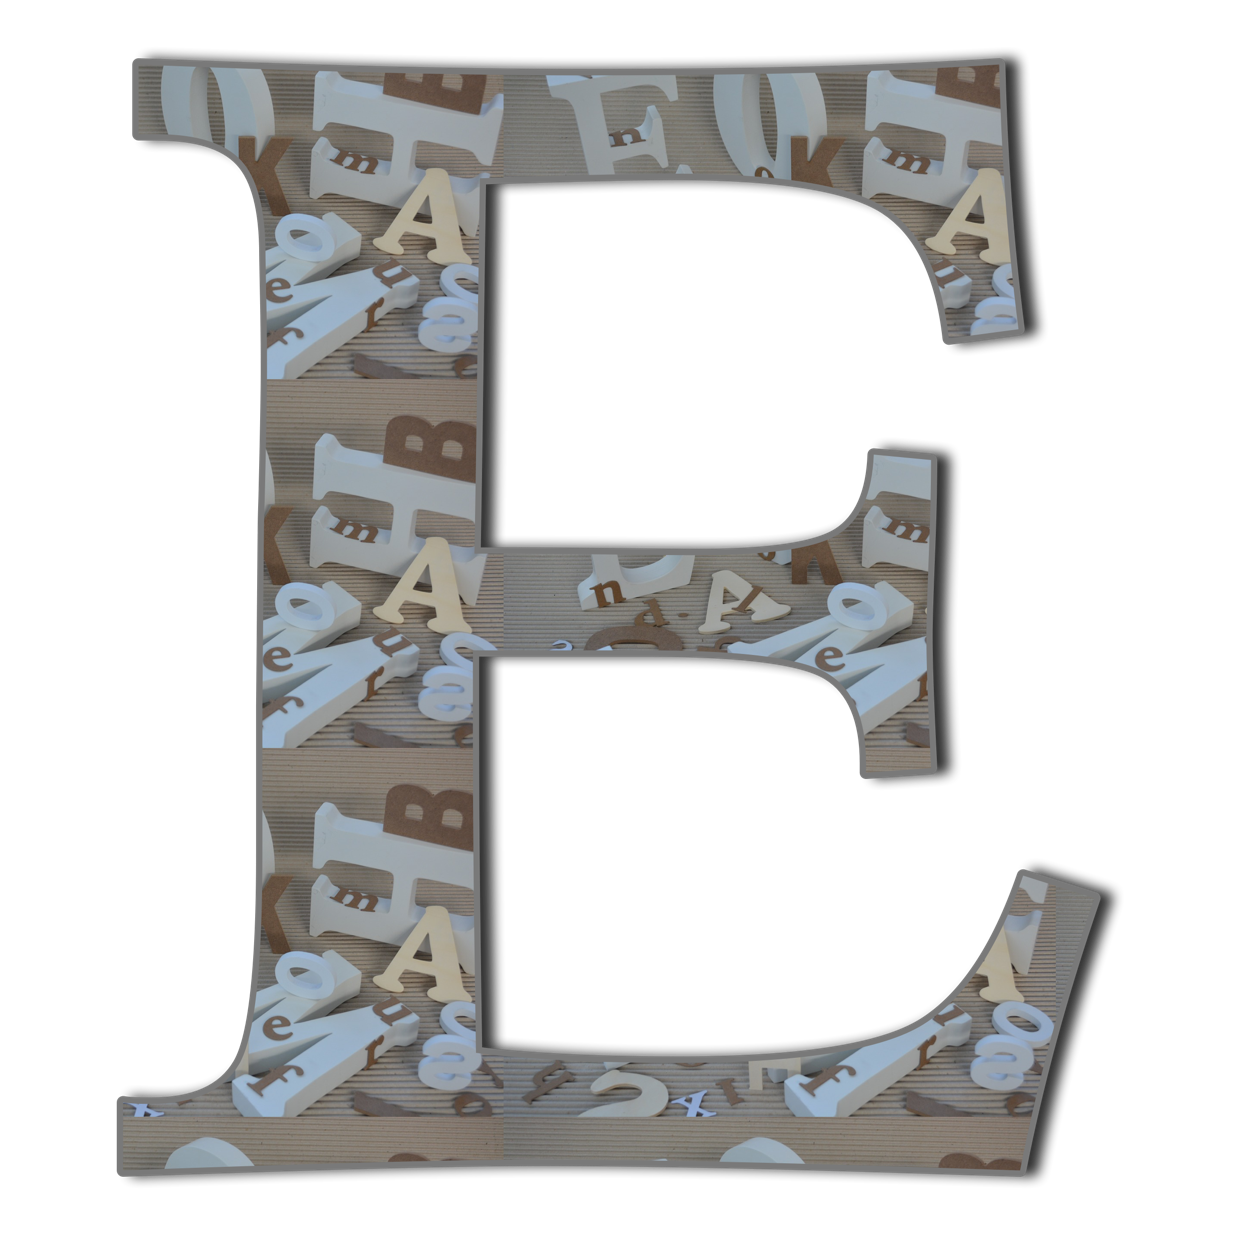 The letter E composed of an image of other letters